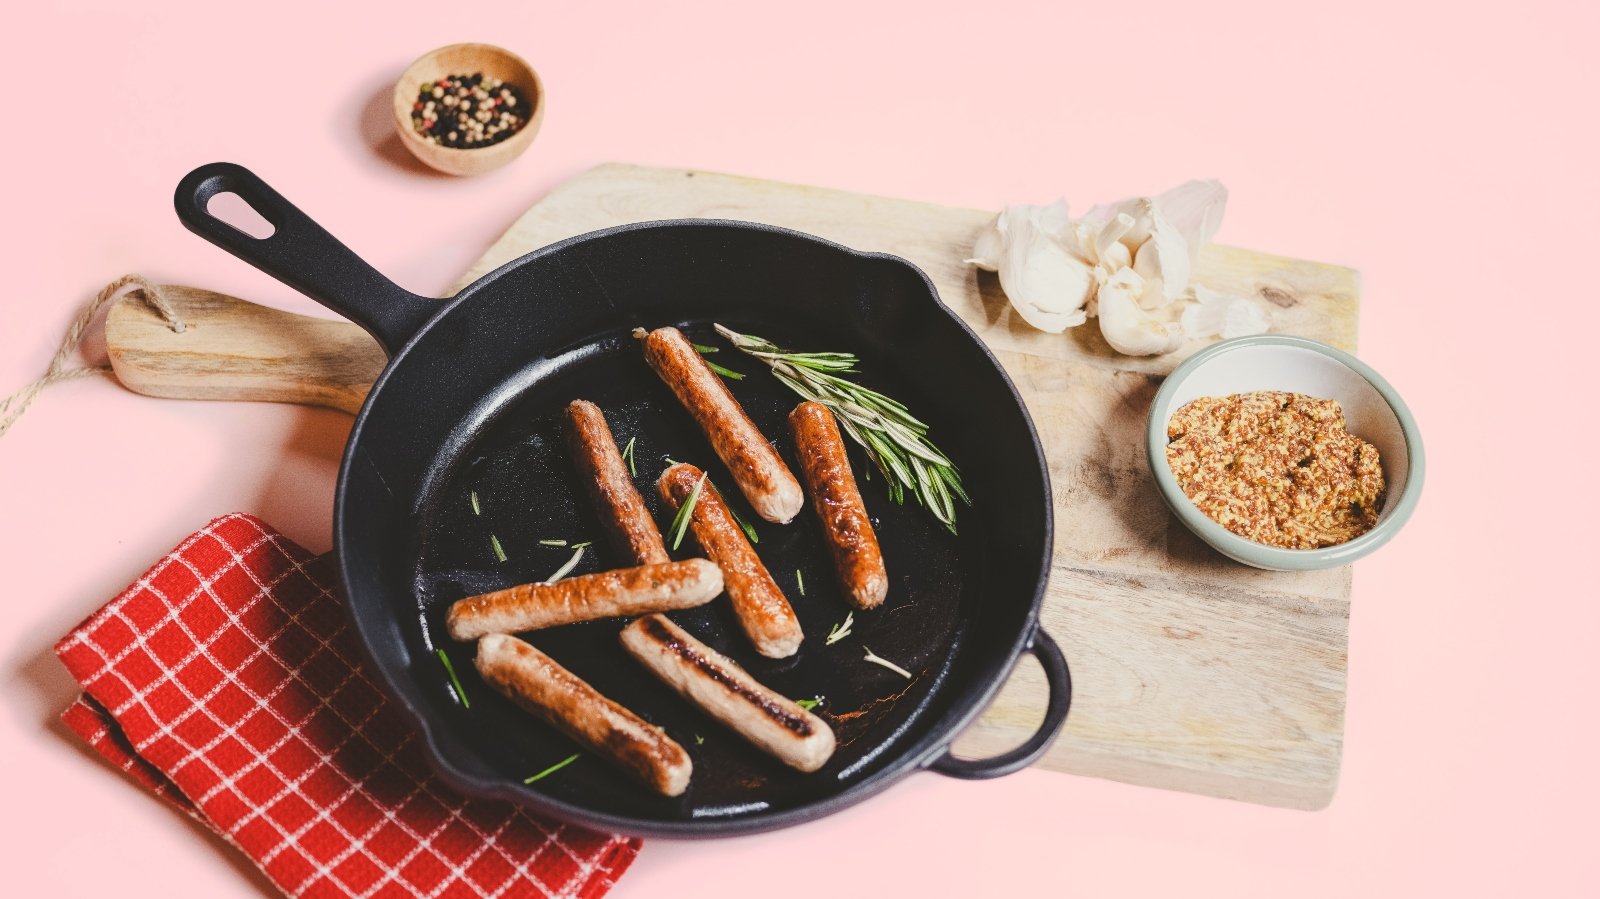 Meatable sausages in a pan against a pink background